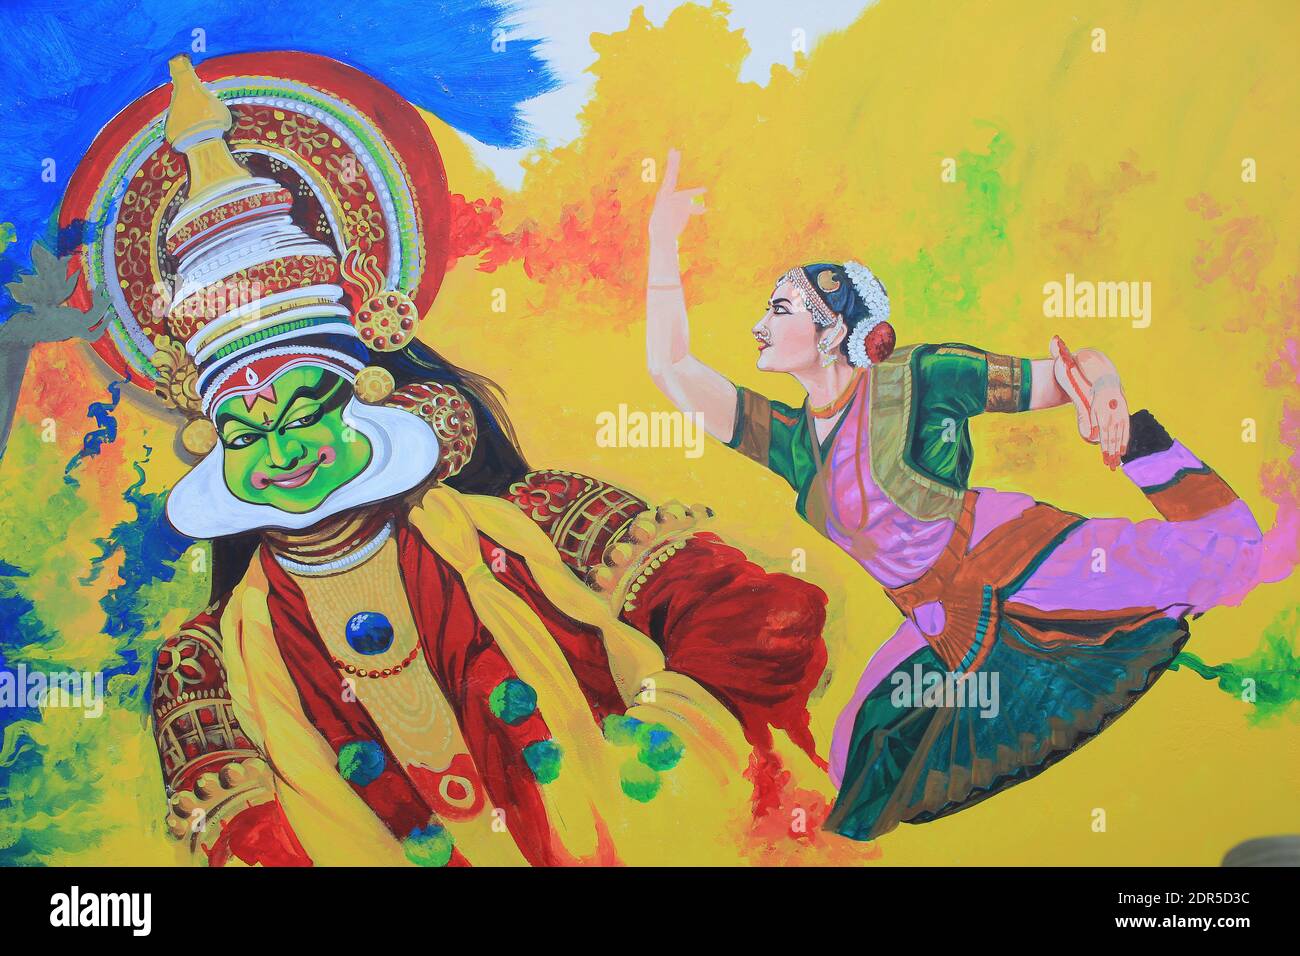 Painting of Pacha vesham (Krishna)  and a female performer from Kathakali, a classical art form of dance Kerala, India Stock Photo